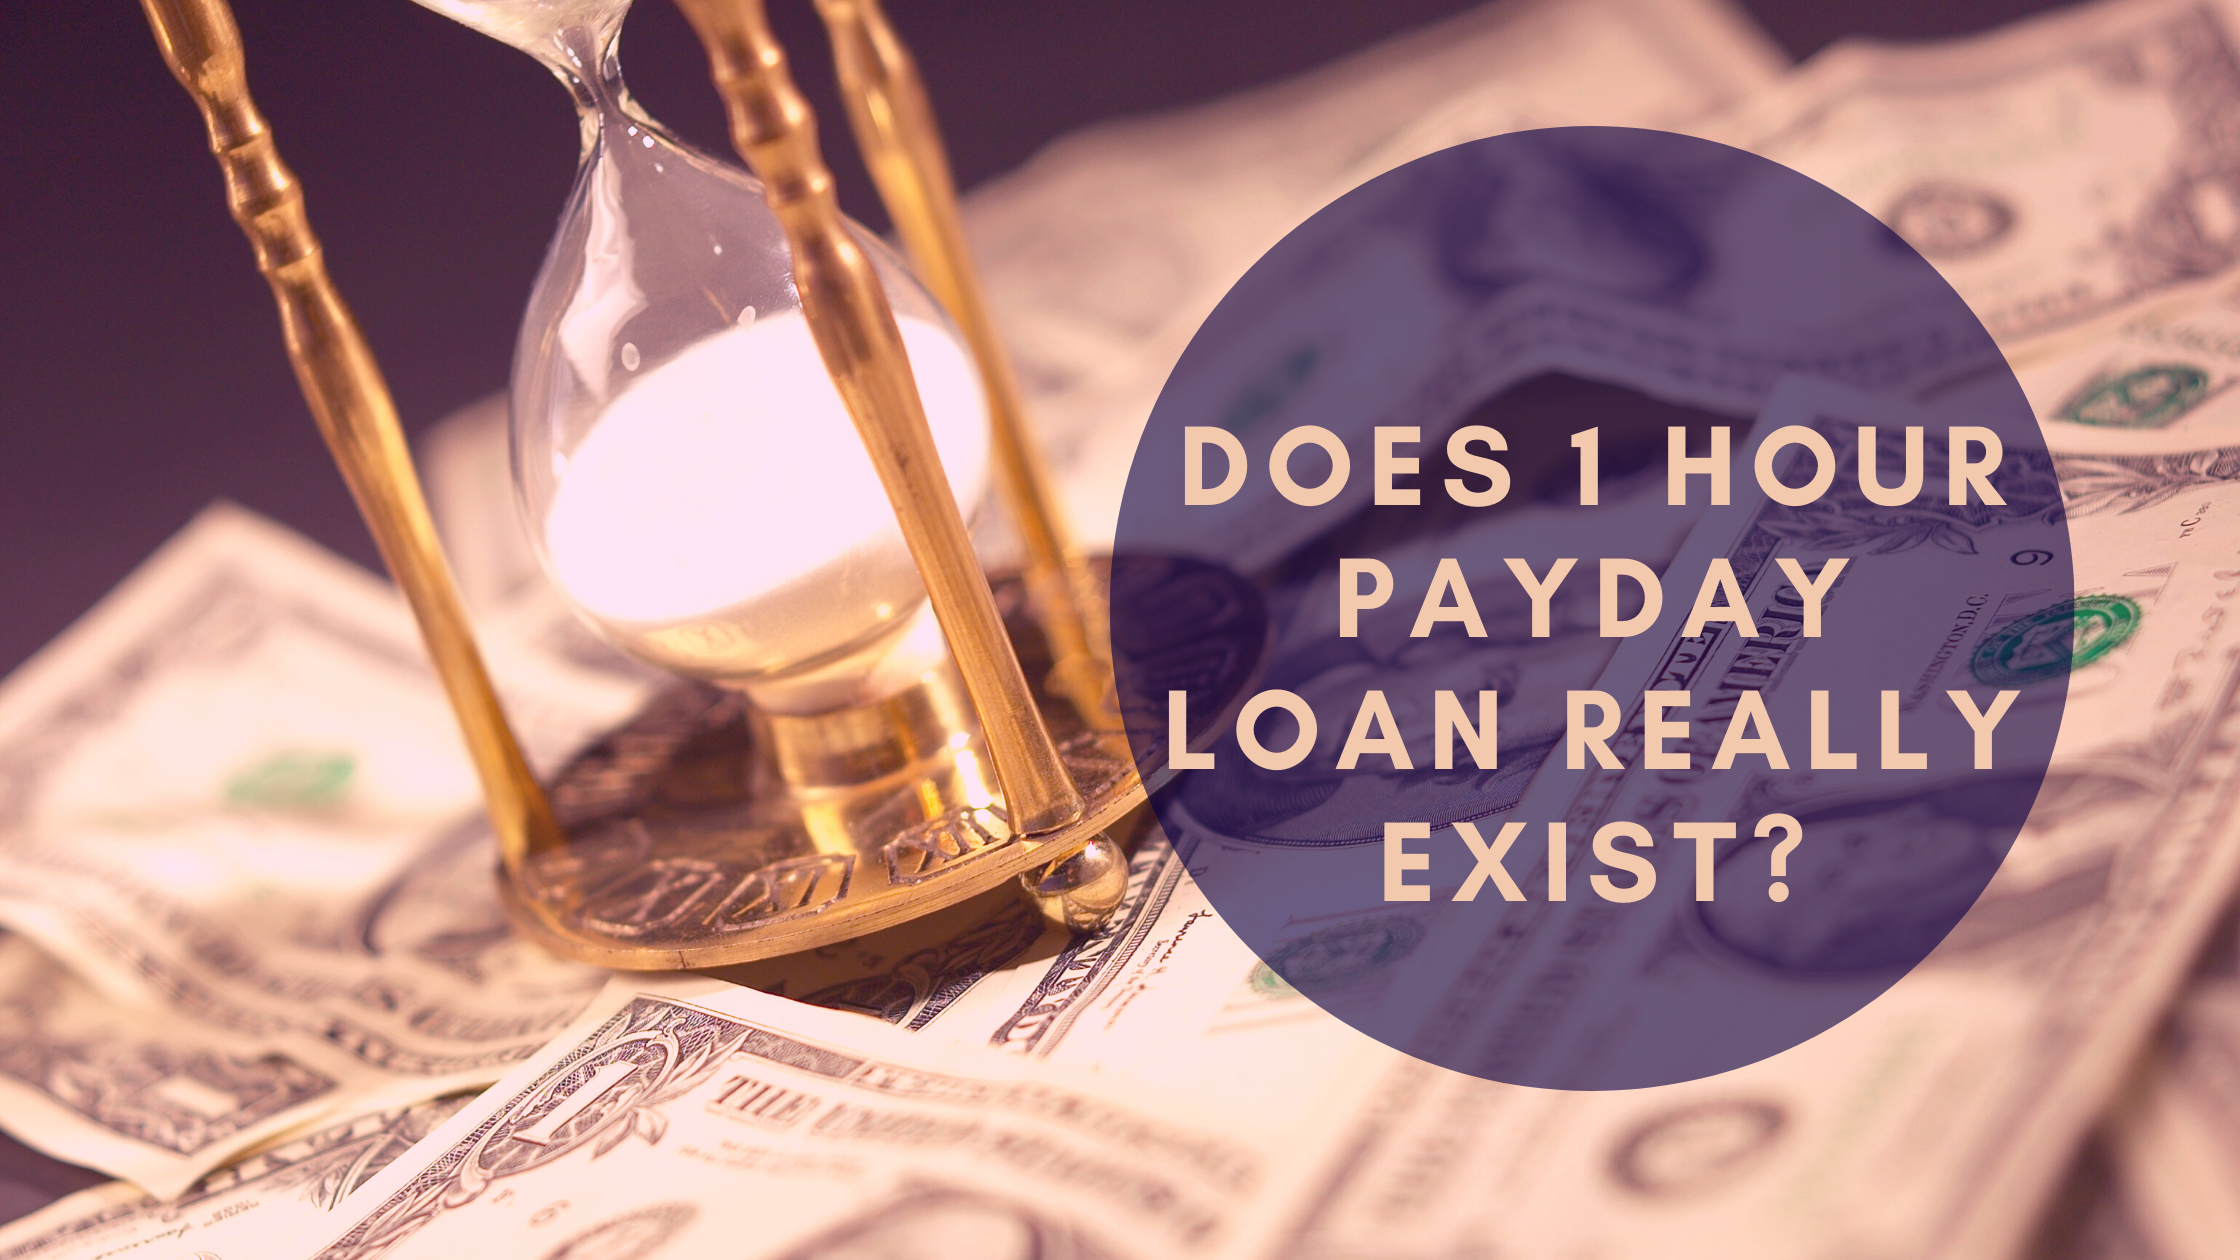 Does 1 hour payday loan really exist